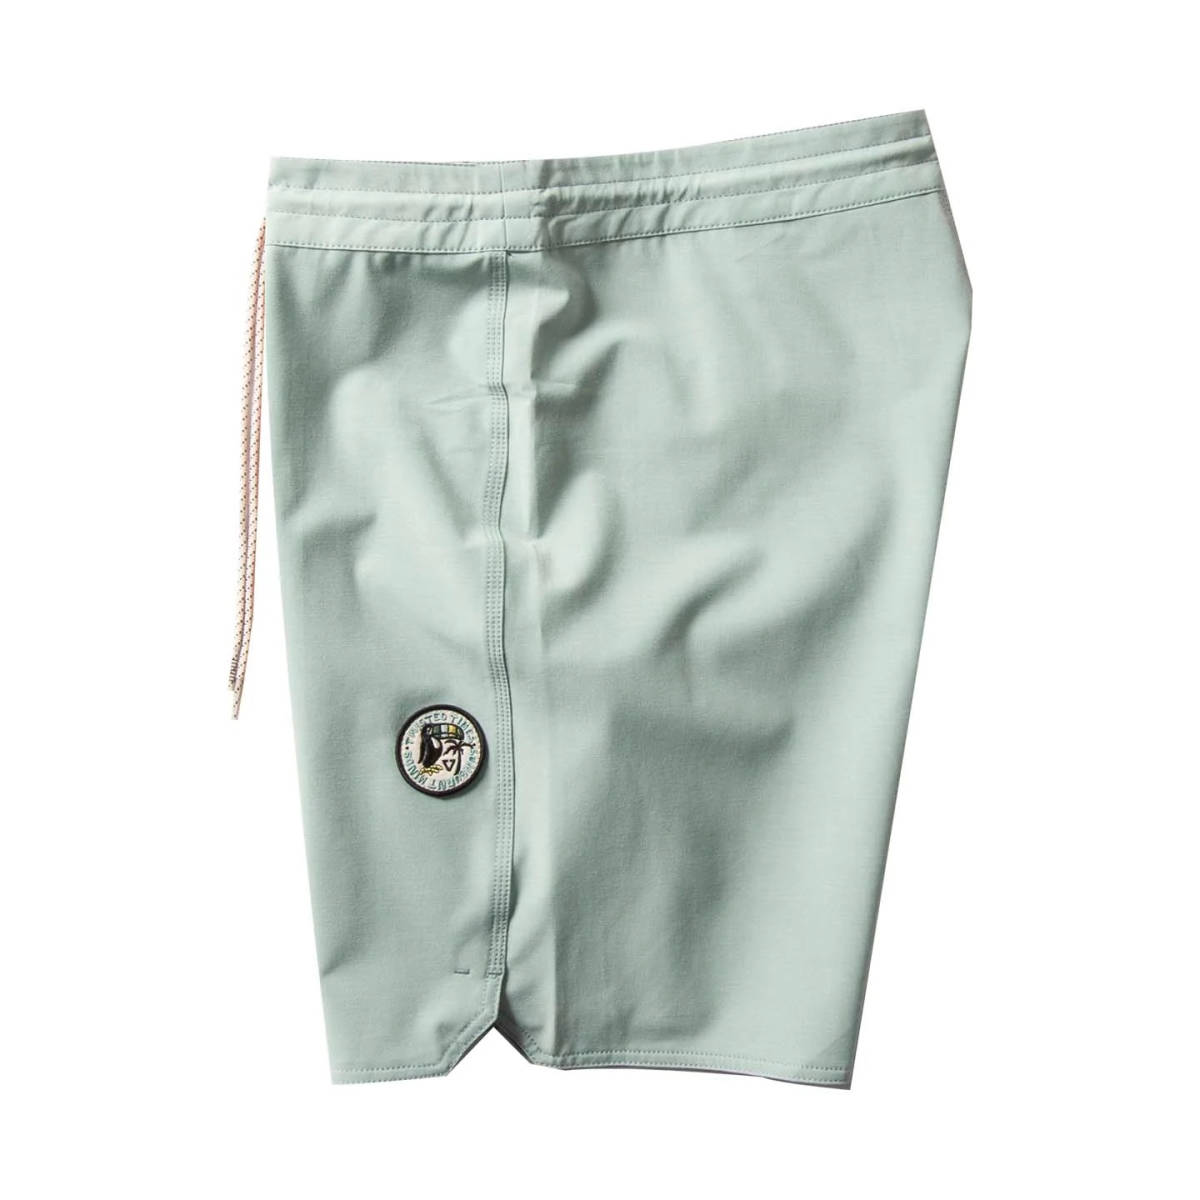 ☆Sale/新品/正規品 VISSLA ”SOLID SETS 18.5” BOARD SHORTS | Color：ALO | Size：28int/70cm | ヴィスラ | ボードショーツ_画像3